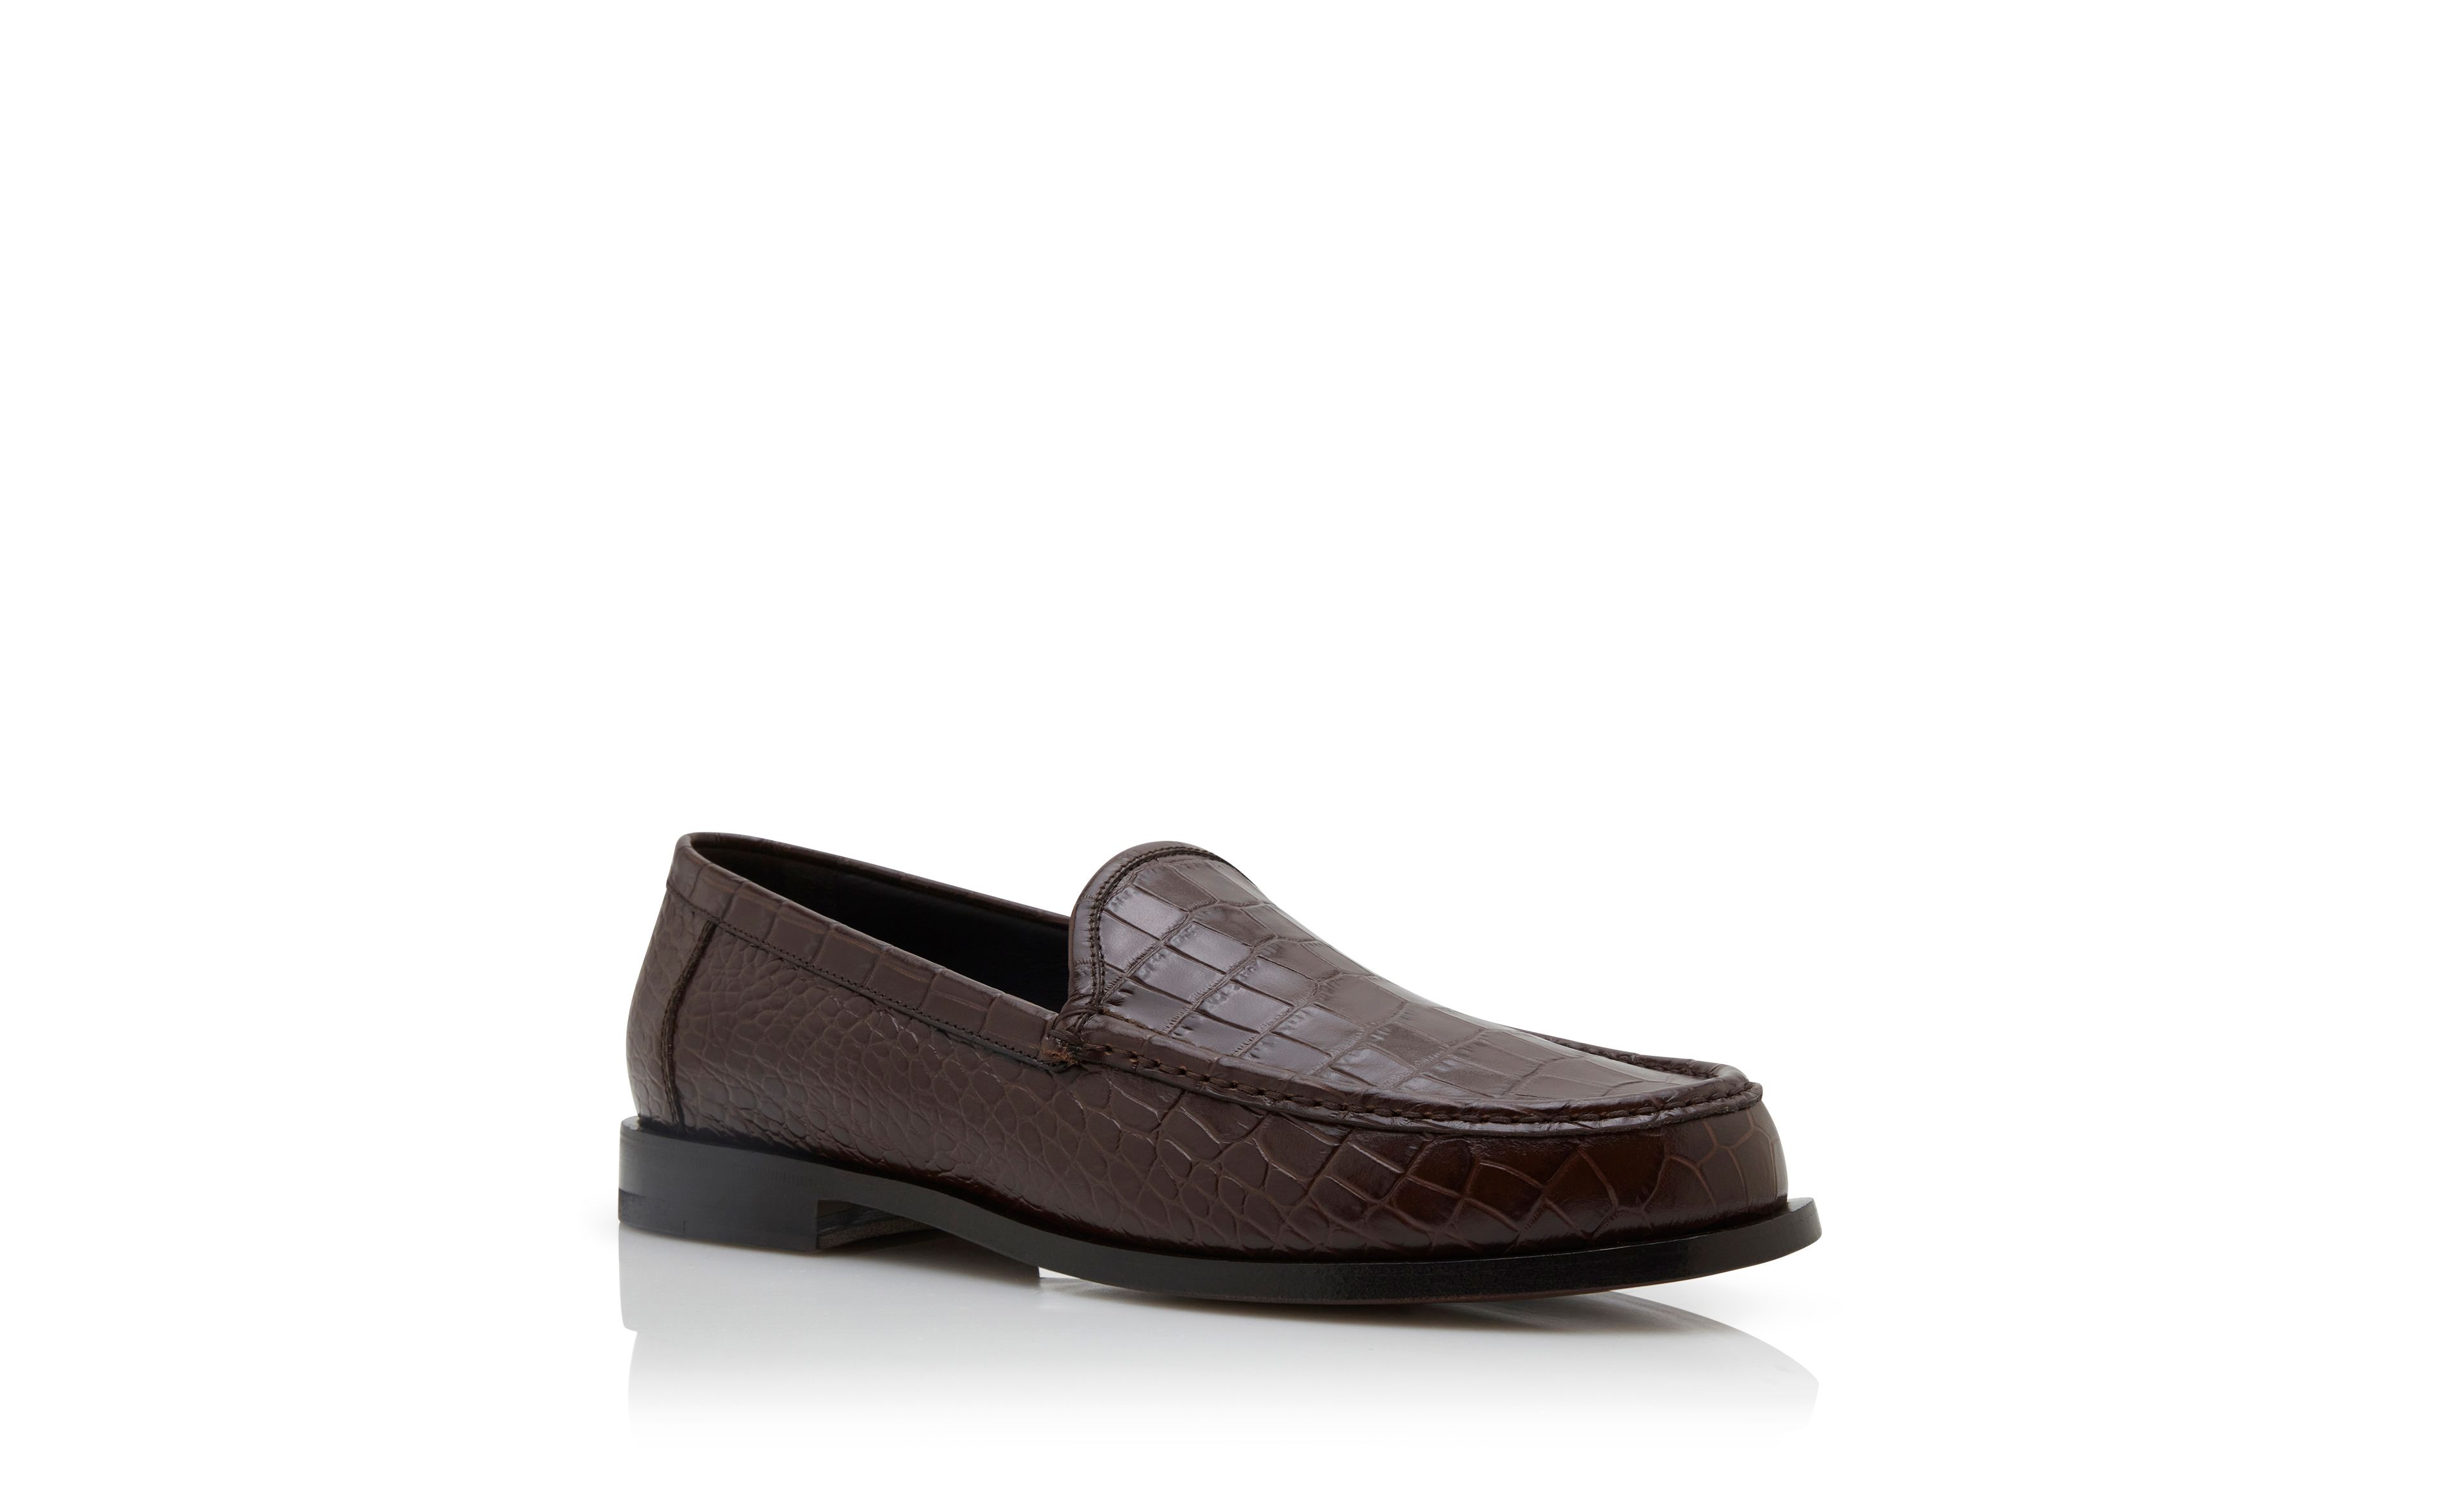 Designer Dark Brown Calf Leather Loafers - Image Upsell